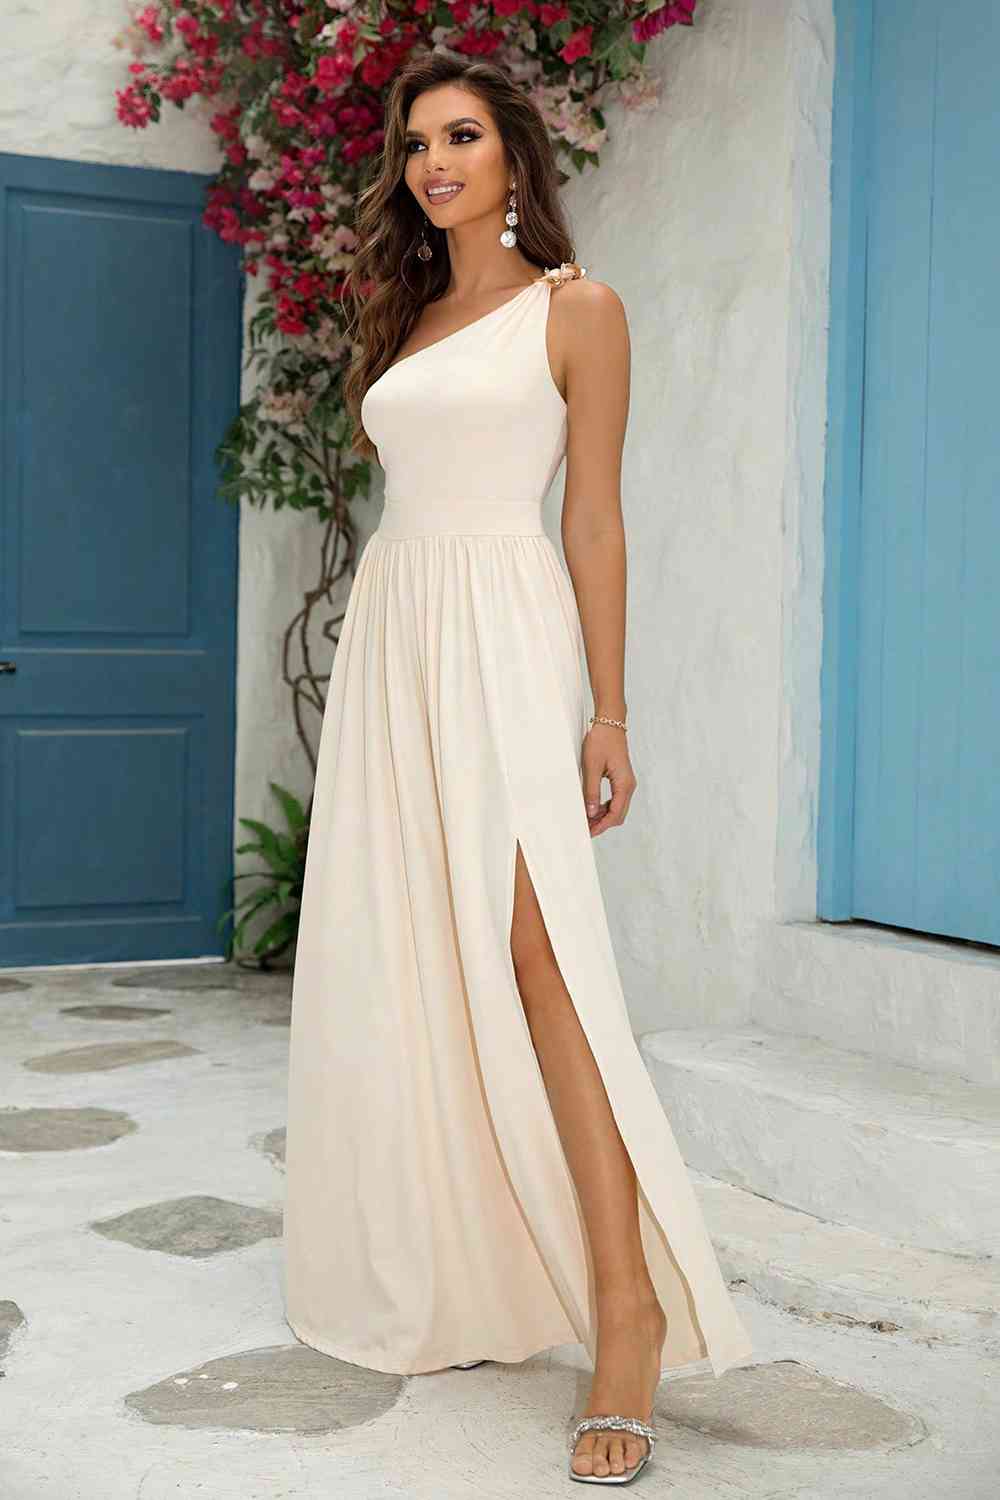 One-Shoulder Split Maxi Dress - Kawaii Stop - Alluring Look, Christmas, Effortless Beauty, Elegant Fashion, Imported Dress, Maxi Dress, One-Shoulder, Ringing-N, Ship From Overseas, Special Occasion, Standout Elegance, Stretchy Fabric, Sultry Style, Thigh-High Split, Women's Clothing